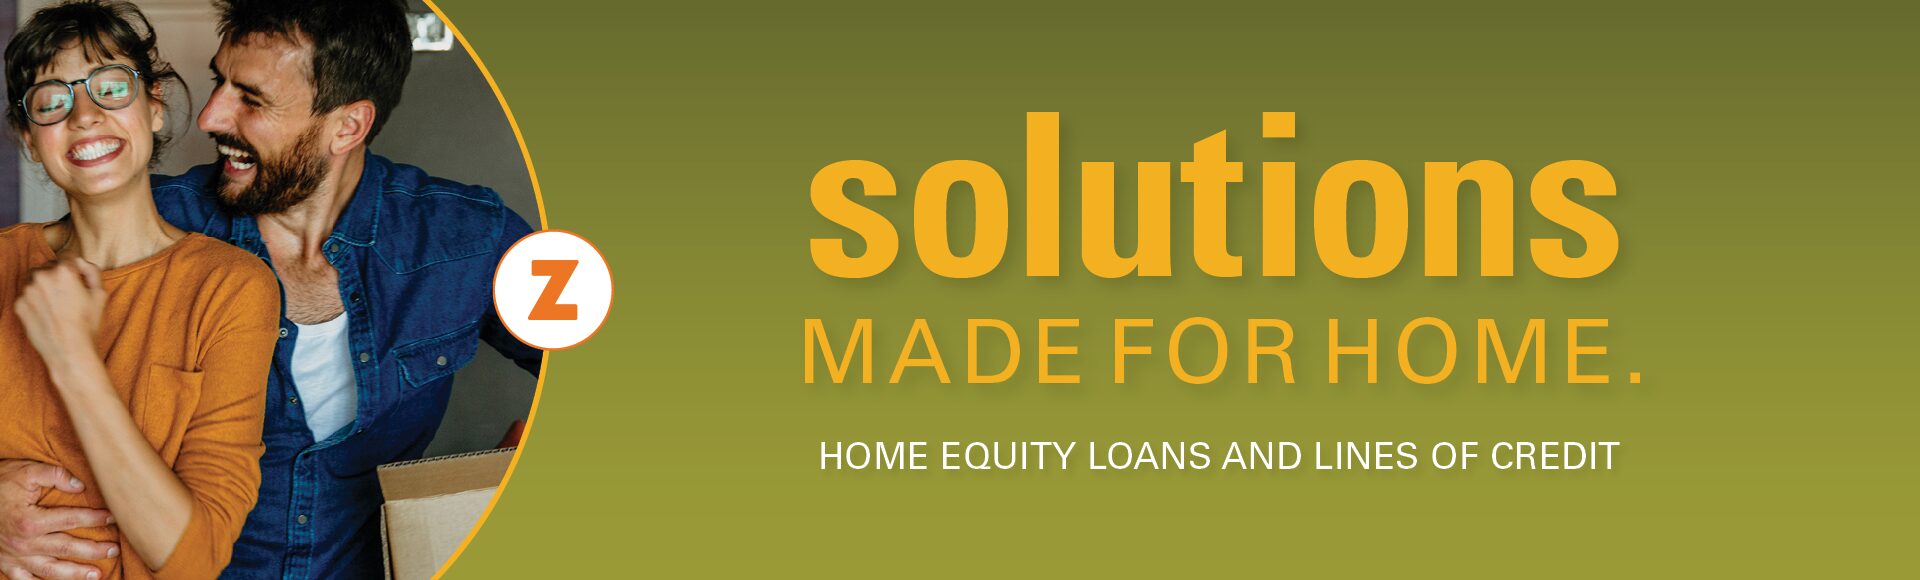 Graphic reads: "Solutions made for home. Home equity loans and lines of credit."